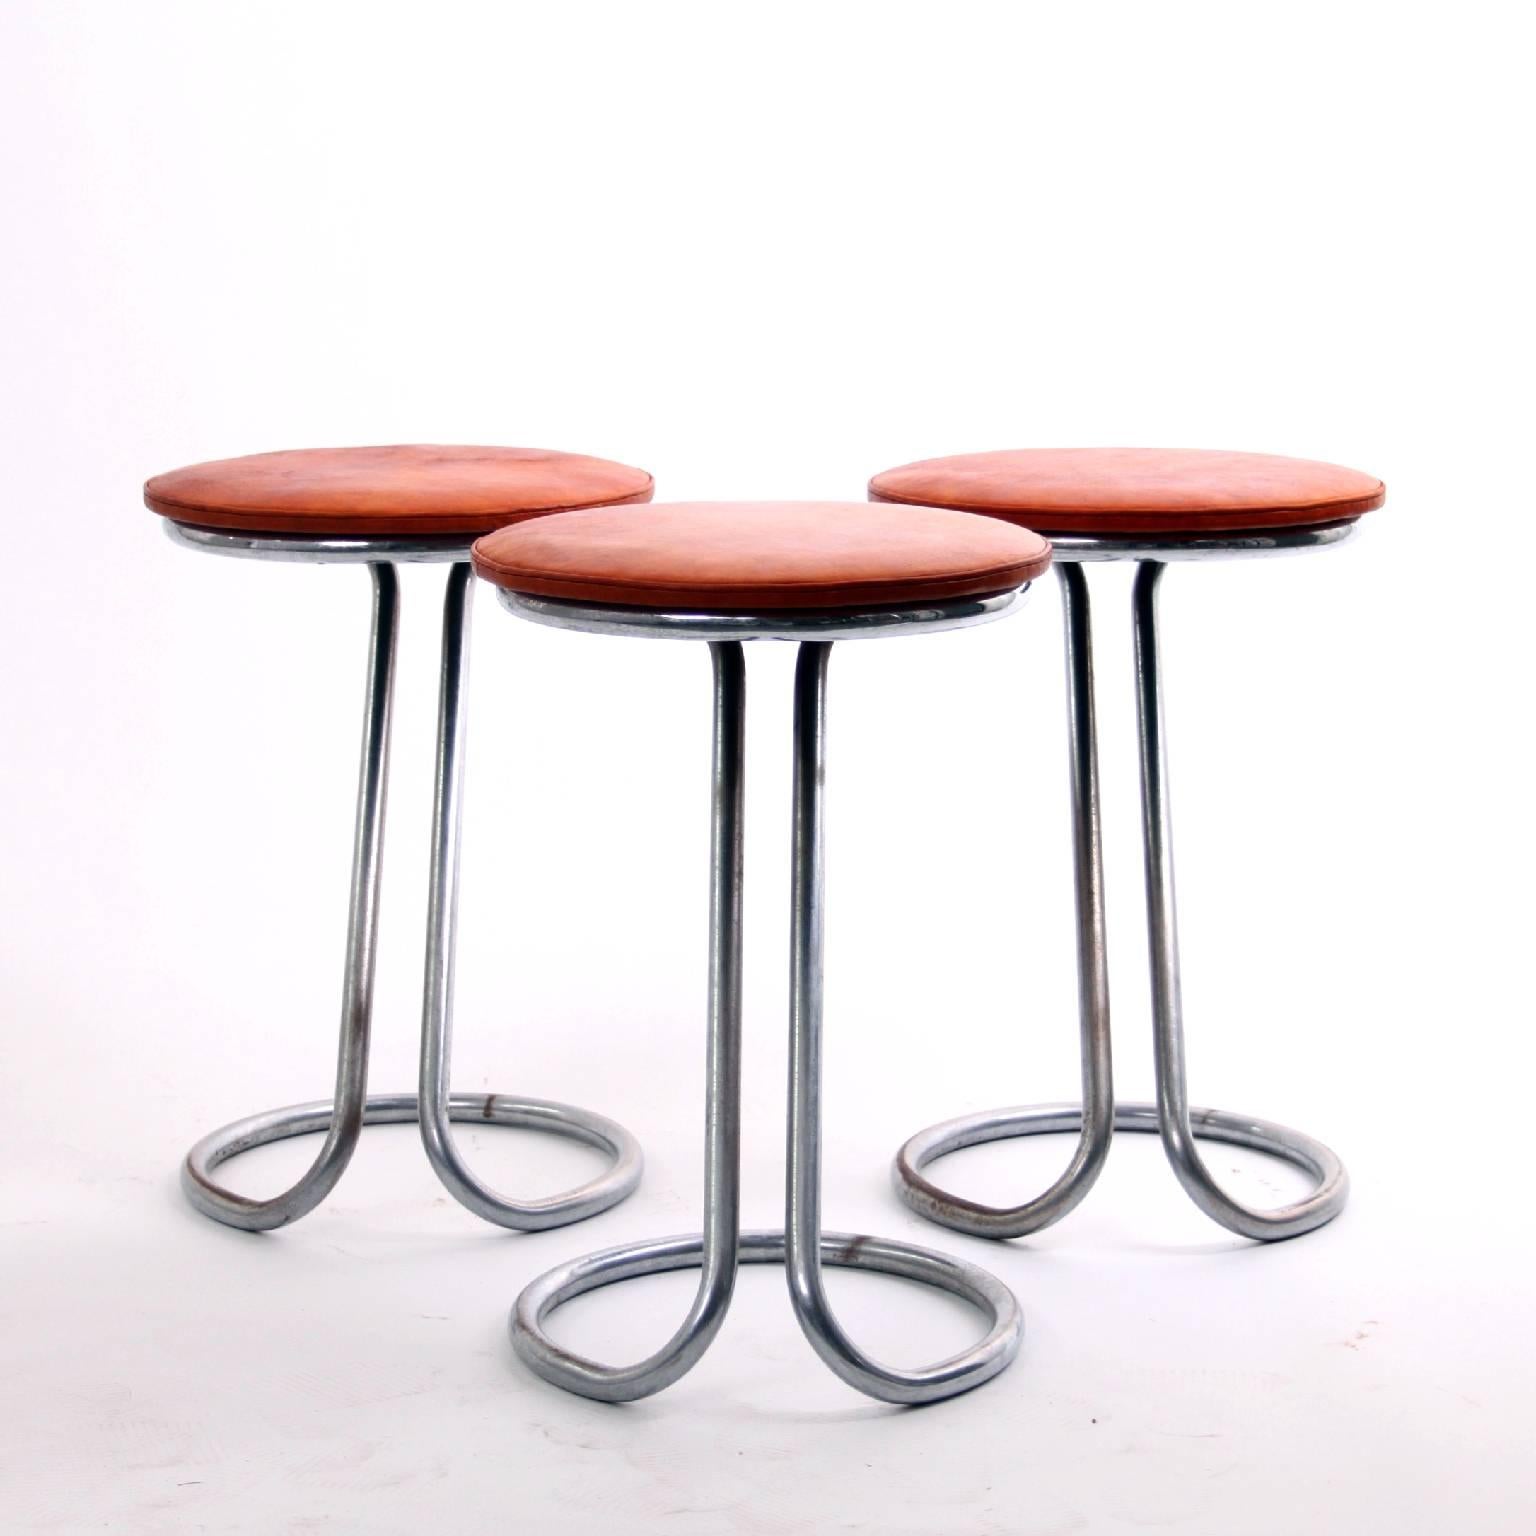 Mid-Century Modern Rare Z-Stools by Gilbert Rohde with Leather Seats, 1933